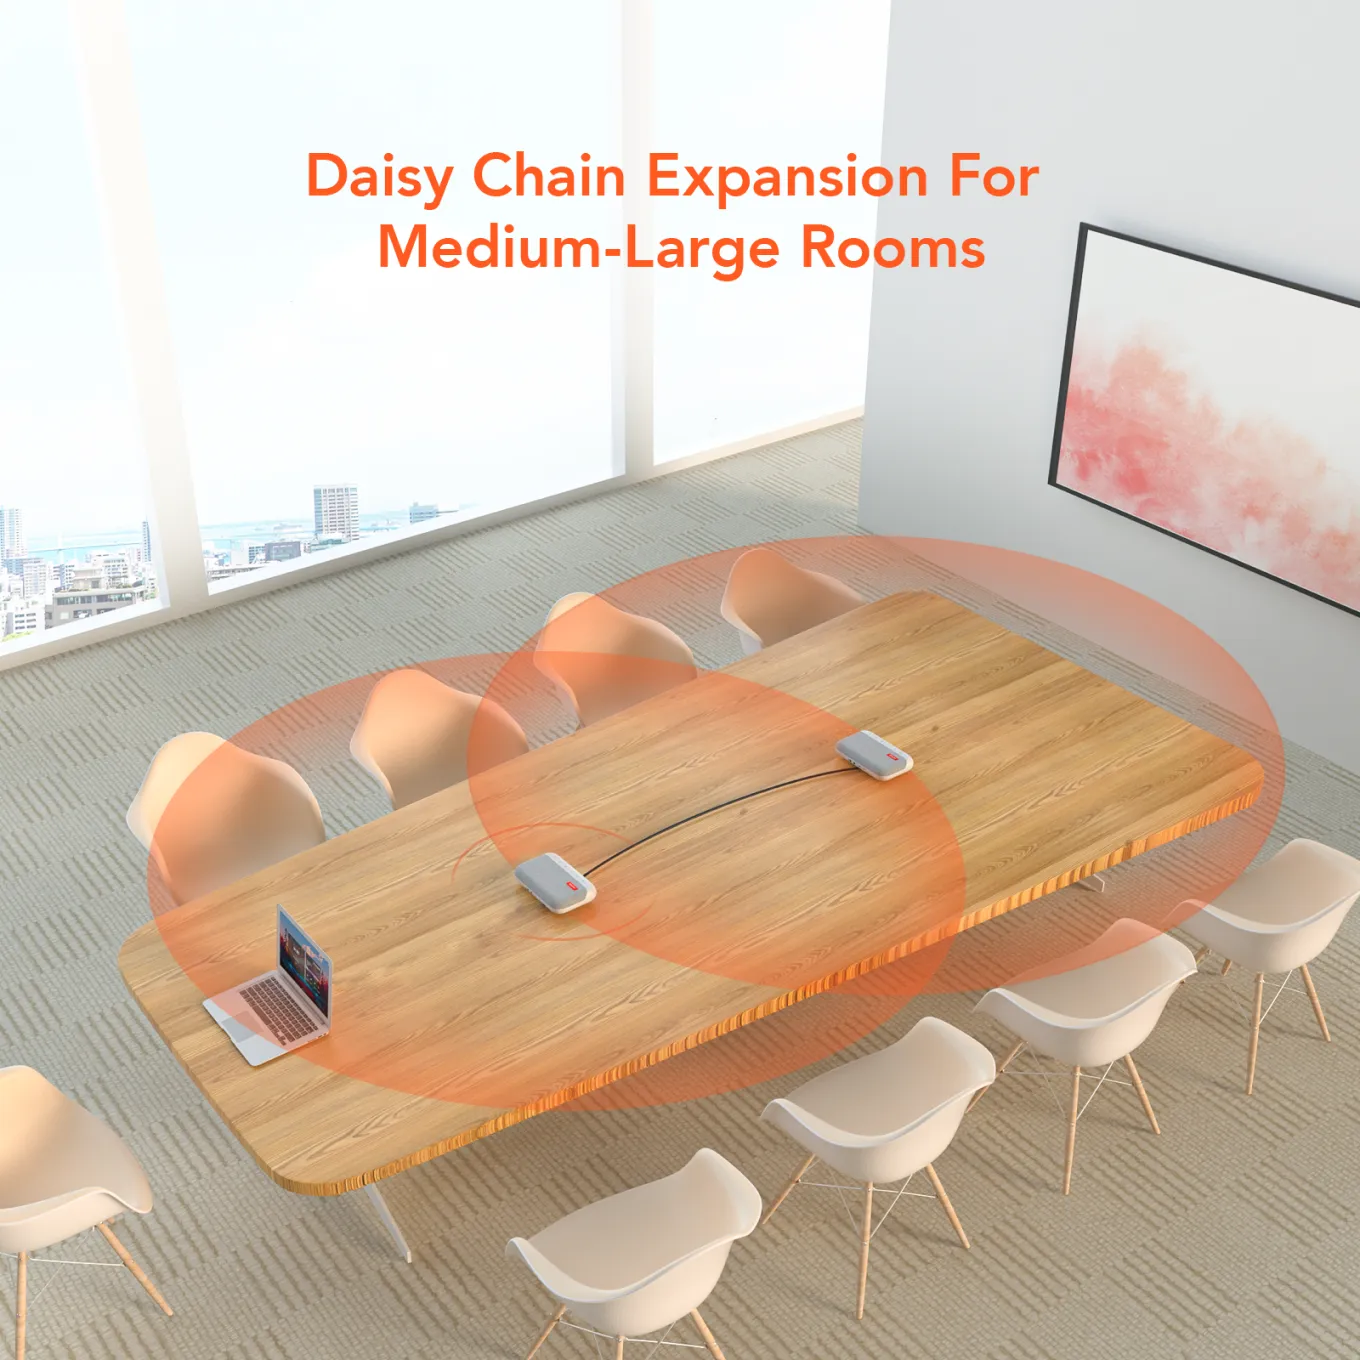 Daisy Chain Expansions